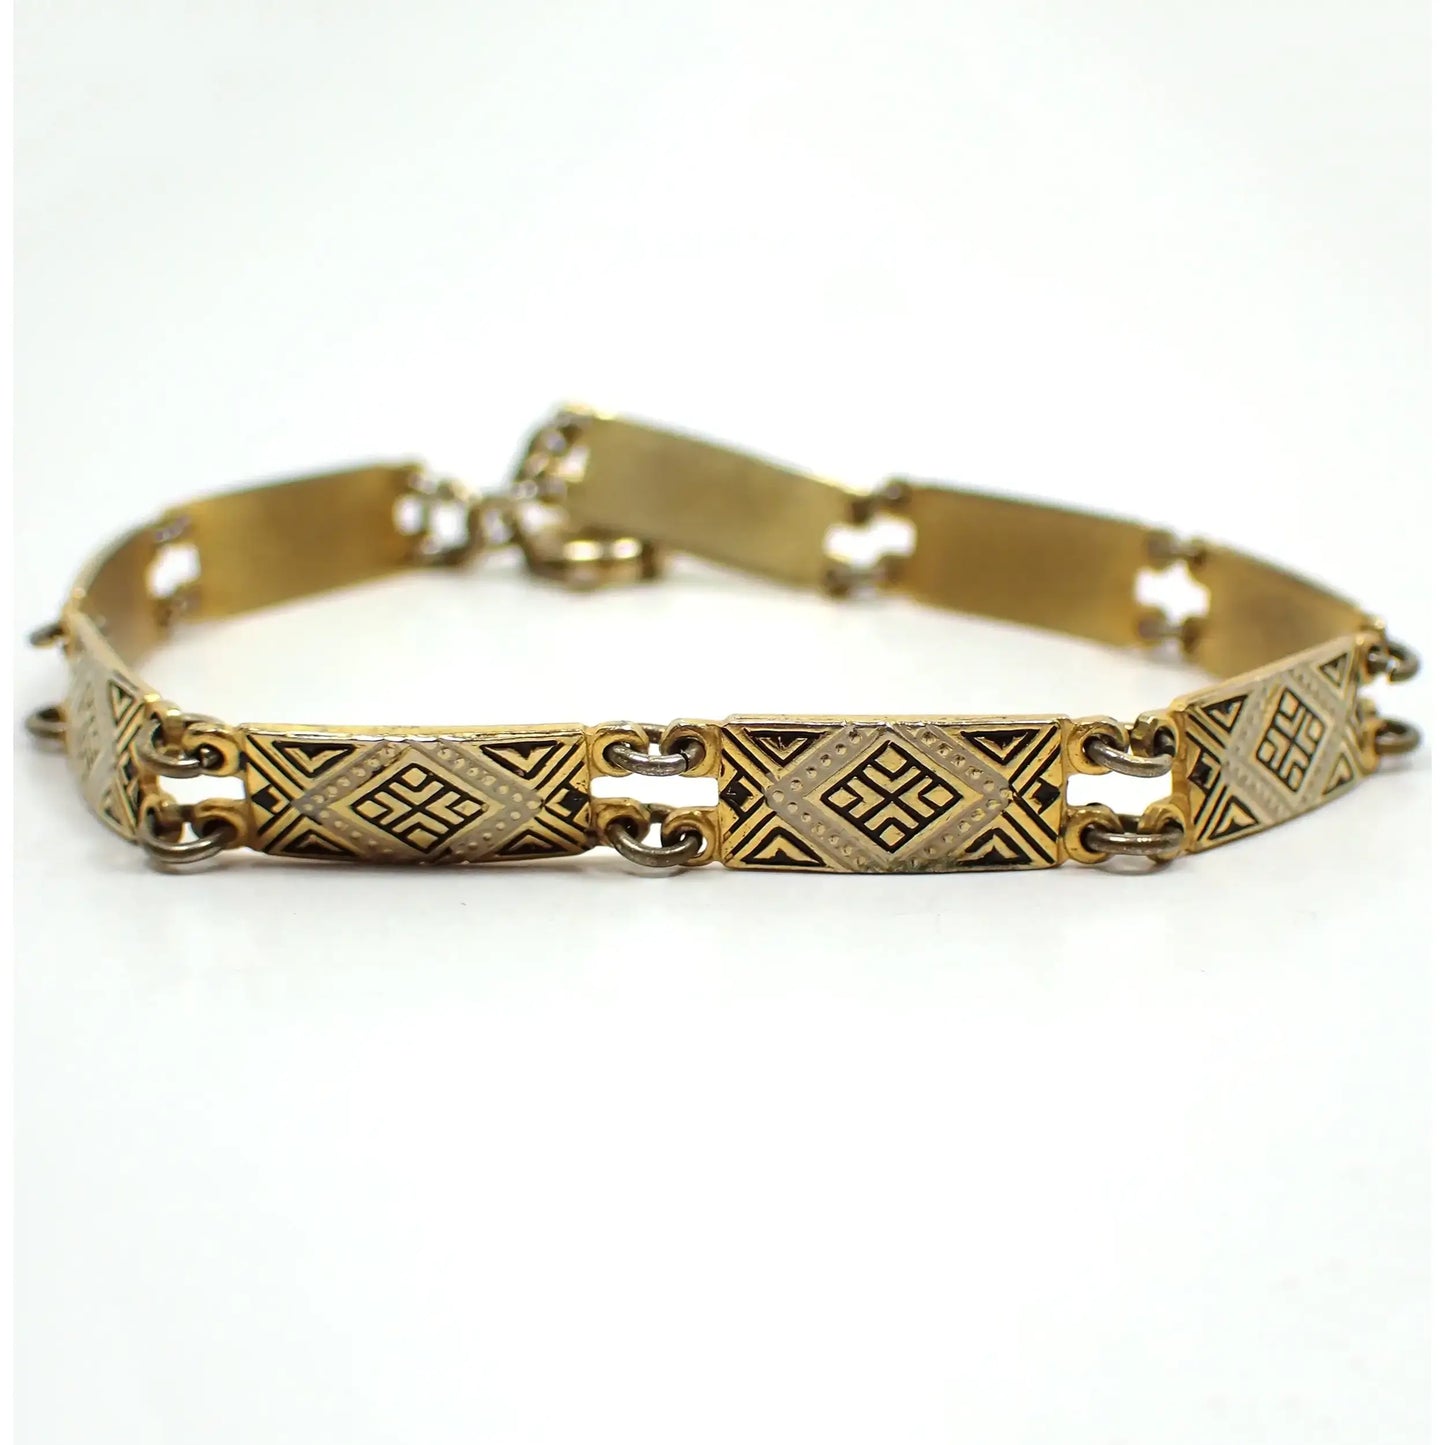 Enlarged view of the the bracelet on its side showing the top side of some of the links. They are rectangle shaped and the metal is gold tone plated in color. There is a geometric diamond shaped design in the middle with a white painted edge and black painted accents on the rest of the link. The jump rings holding the links together are darkened. There is a spring ring clasp showing at the back of the photo.